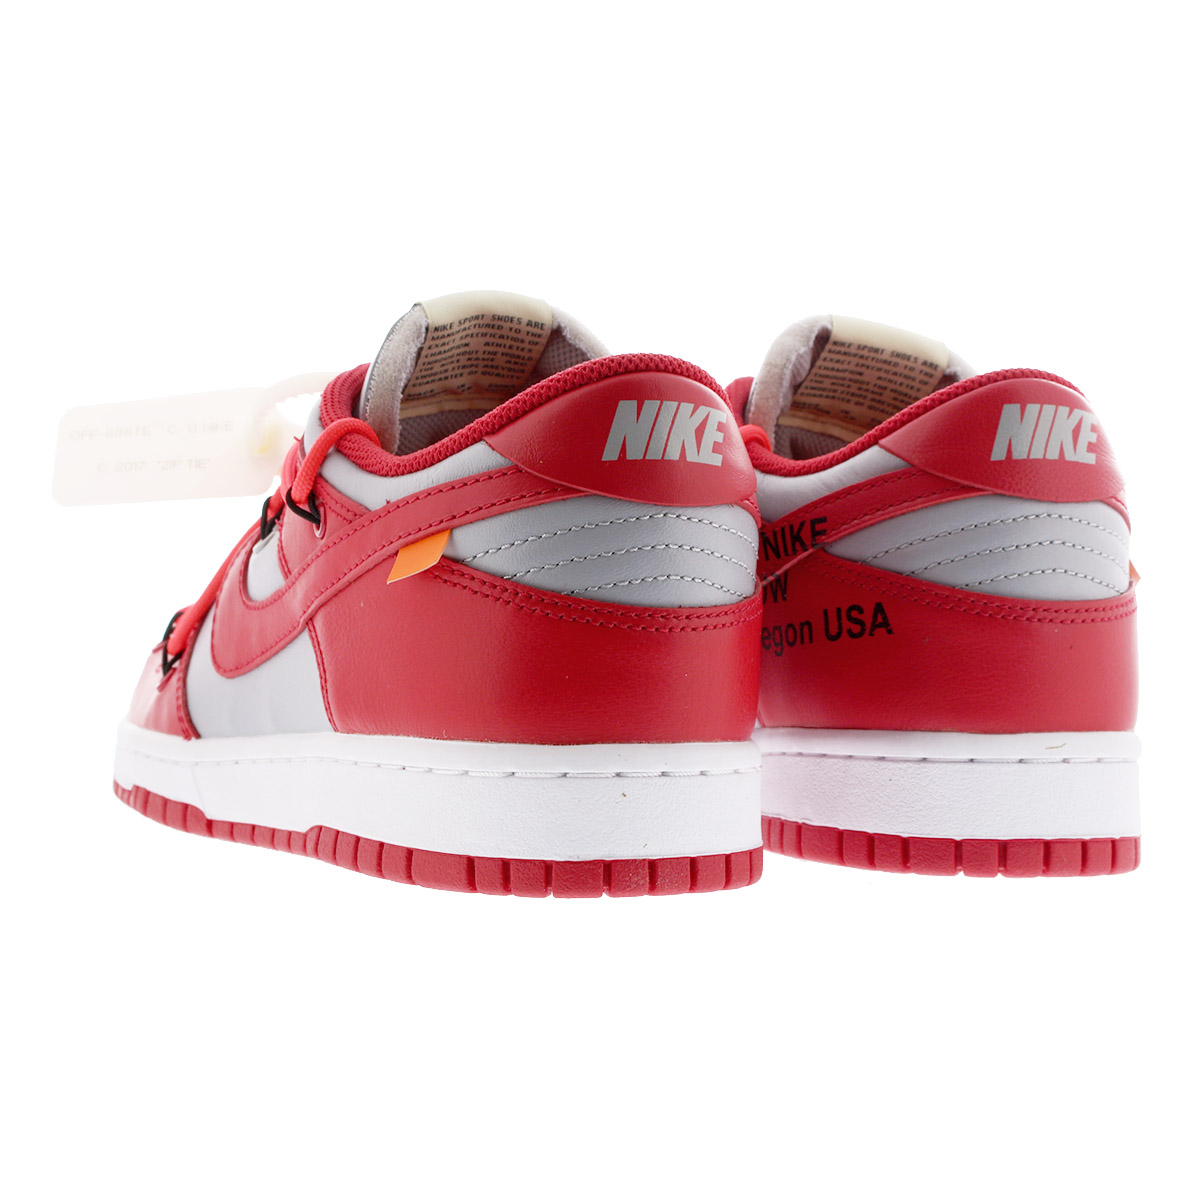 NIKE DUNK LOW LTHR 【OFF-WHITE】 ナイキ ダンク ロー レザー UNIVERSITY RED/WOLF GREY  ct0856-600 | SELECT SHOP LOWTEX